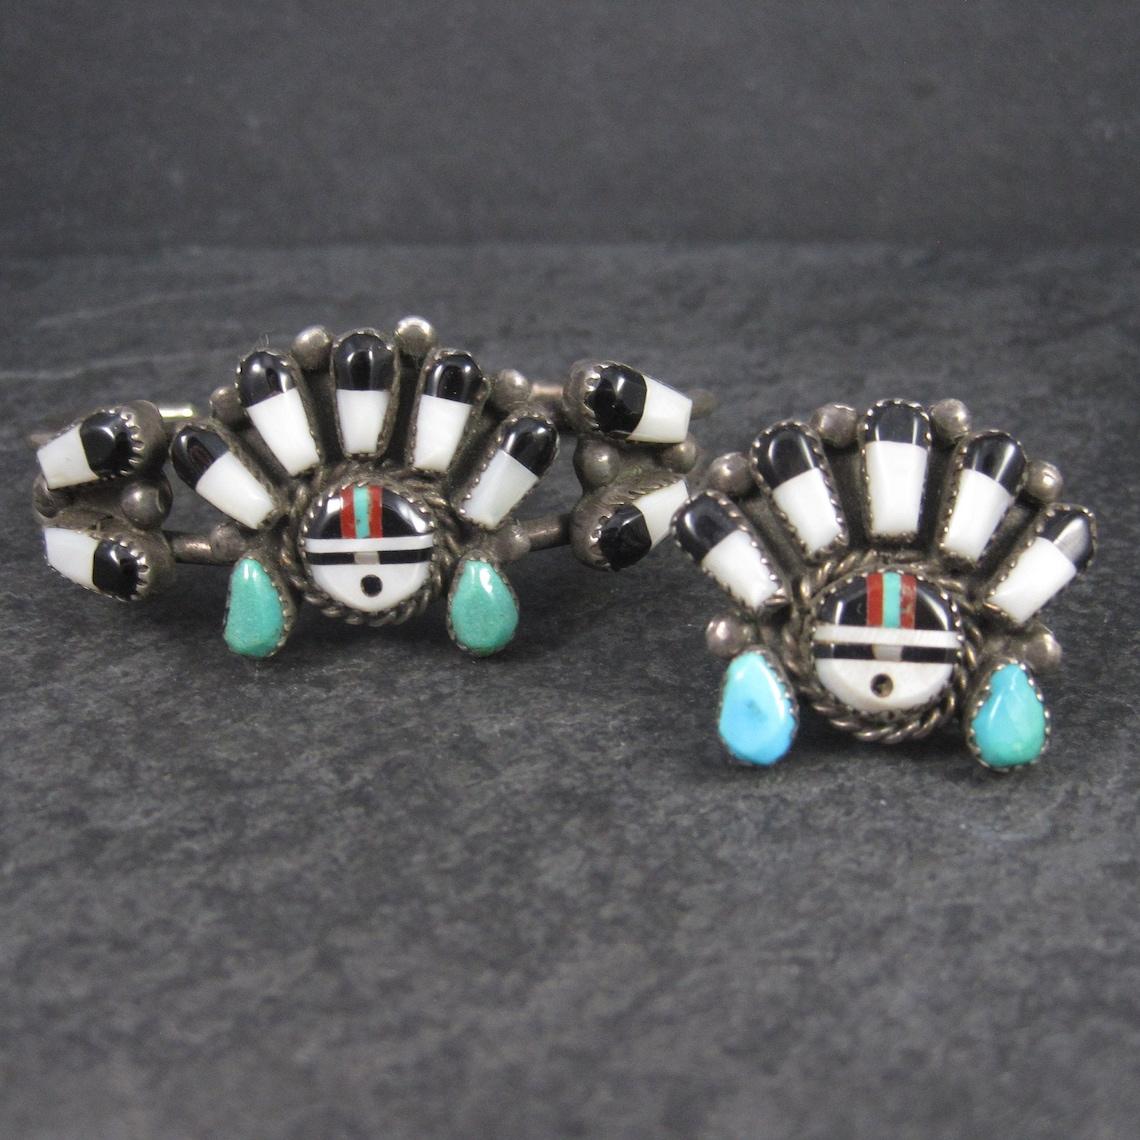 This gorgeous Native American Bracelet and Ring set is sterling silver.

Ring:
Features inlay in turquoise, mother of pearl, jet, and coral.
The face of this ring measures 1 1/8 inches north to south, 1 3/16 inches east to west with a rise of 5mm